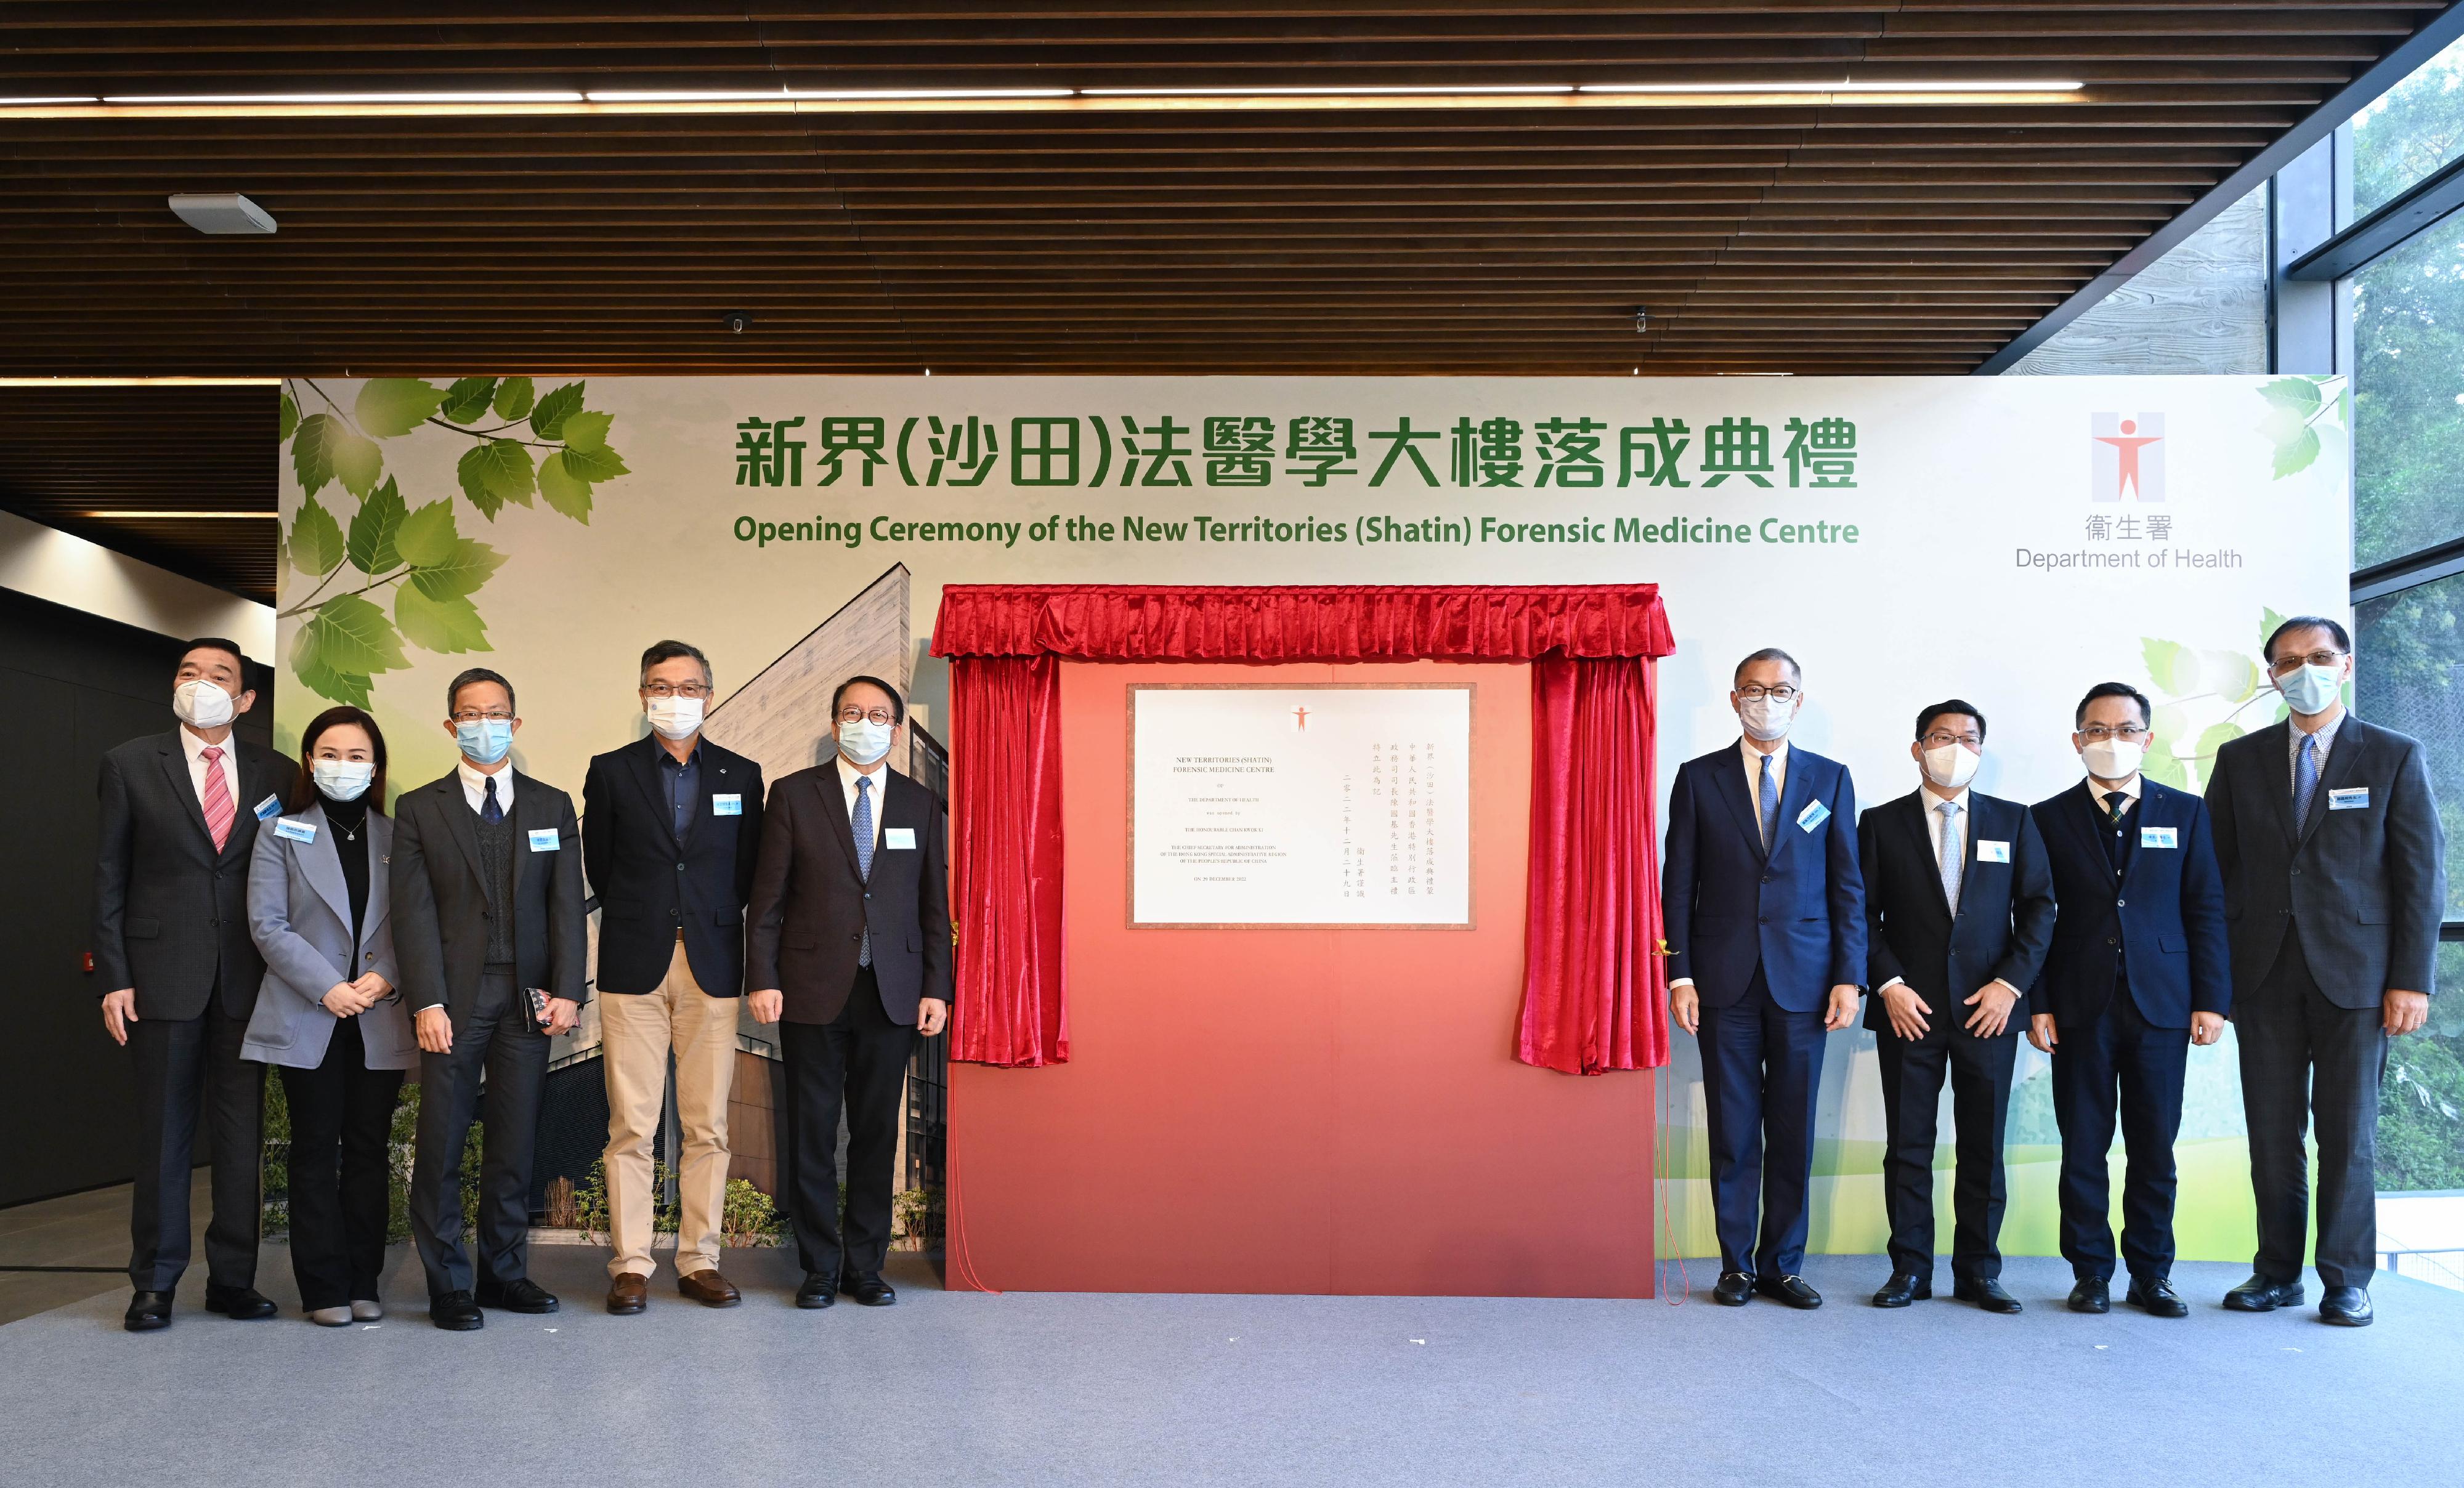 The New Territories (Shatin) Forensic Medicine Centre of the Department of Health (DH) located at 7 Lower Shing Mun Road, Sha Tin officially opened and commenced operation today (December 29). The DH held an opening ceremony for the centre today. Photo shows the Chief Secretary for Administration, Mr Chan Kwok-ki (fifth left); the Deputy Director-General of the Coordination Department of the Liaison Office of the Central People's Government in the Hong Kong Special Administrative Region, Mr Chen Zetao (third right); the Secretary for Health, Professor Lo Chung-mau (fourth right); and the Director of Health, Dr Ronald Lam (second right) officiating at the ceremony.